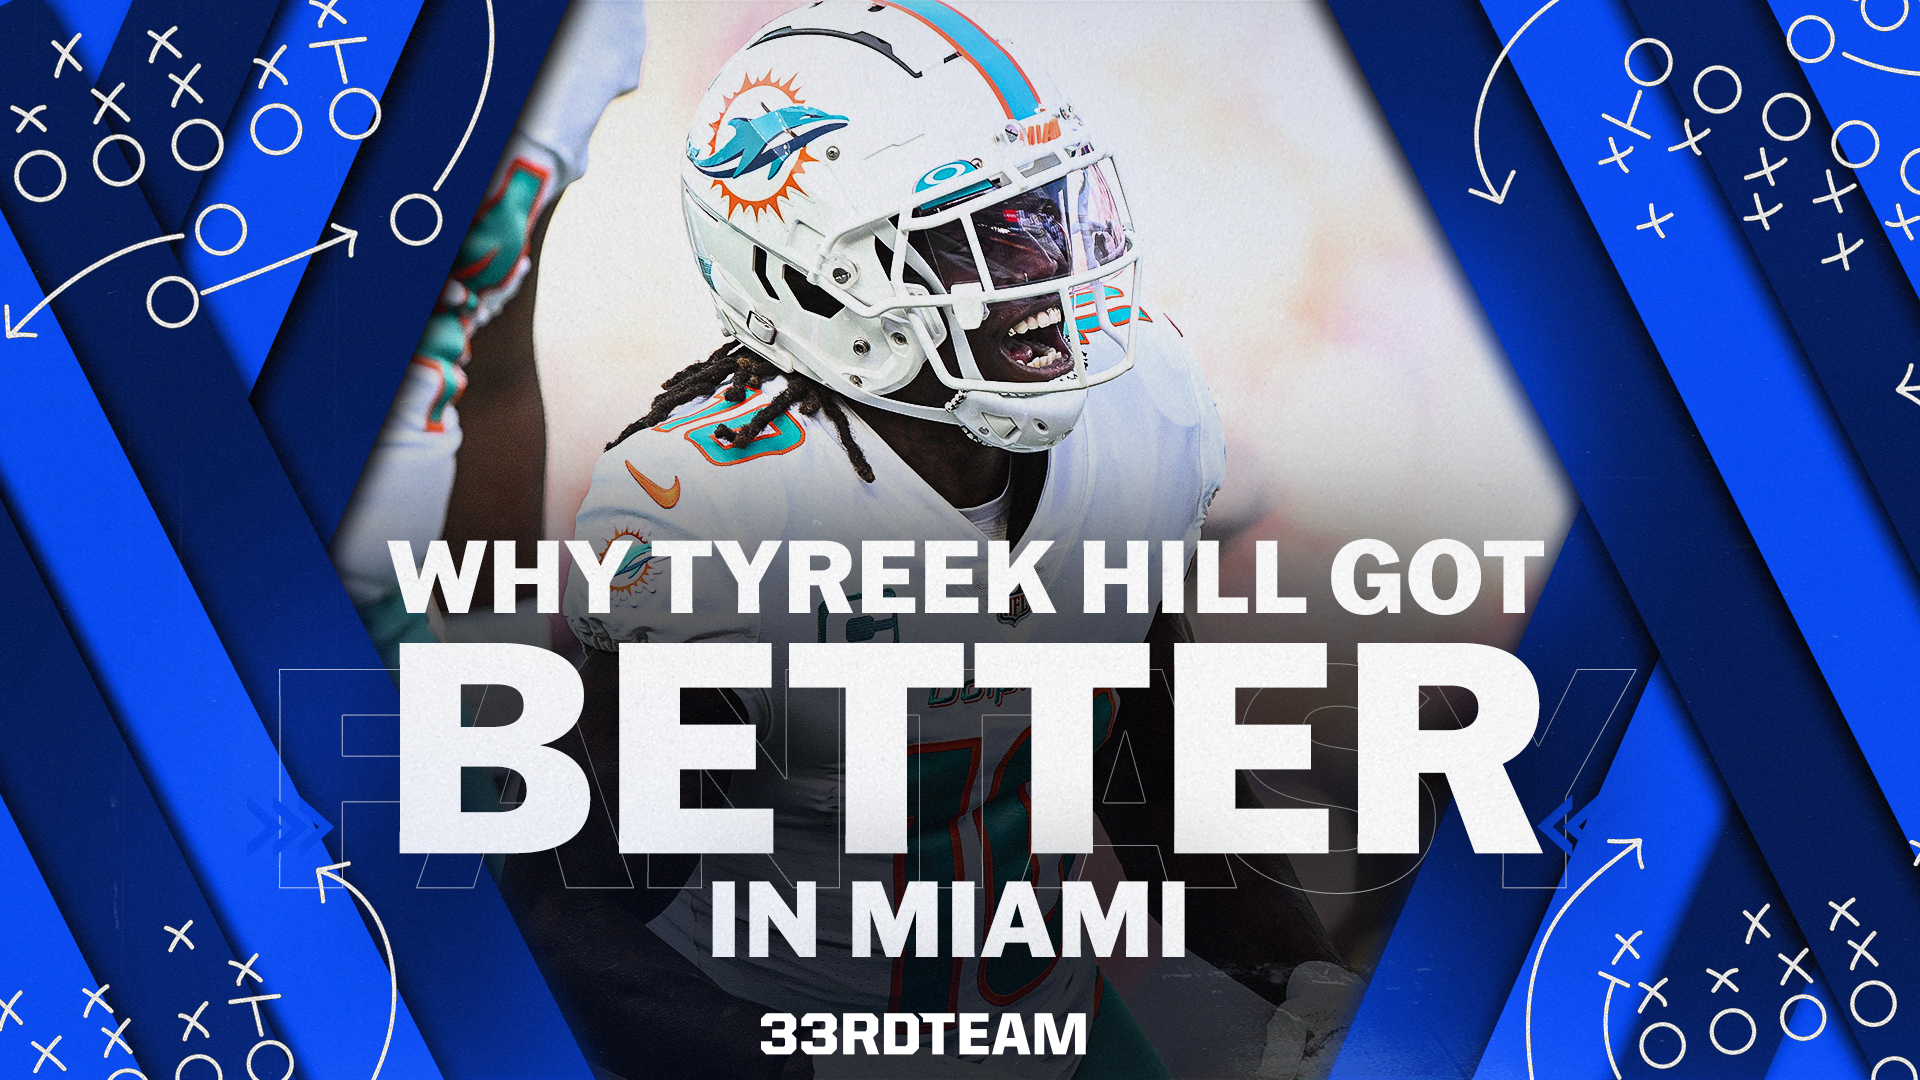 NFL Fantasy Football: Why Tyreek Hill Got Better in Miami